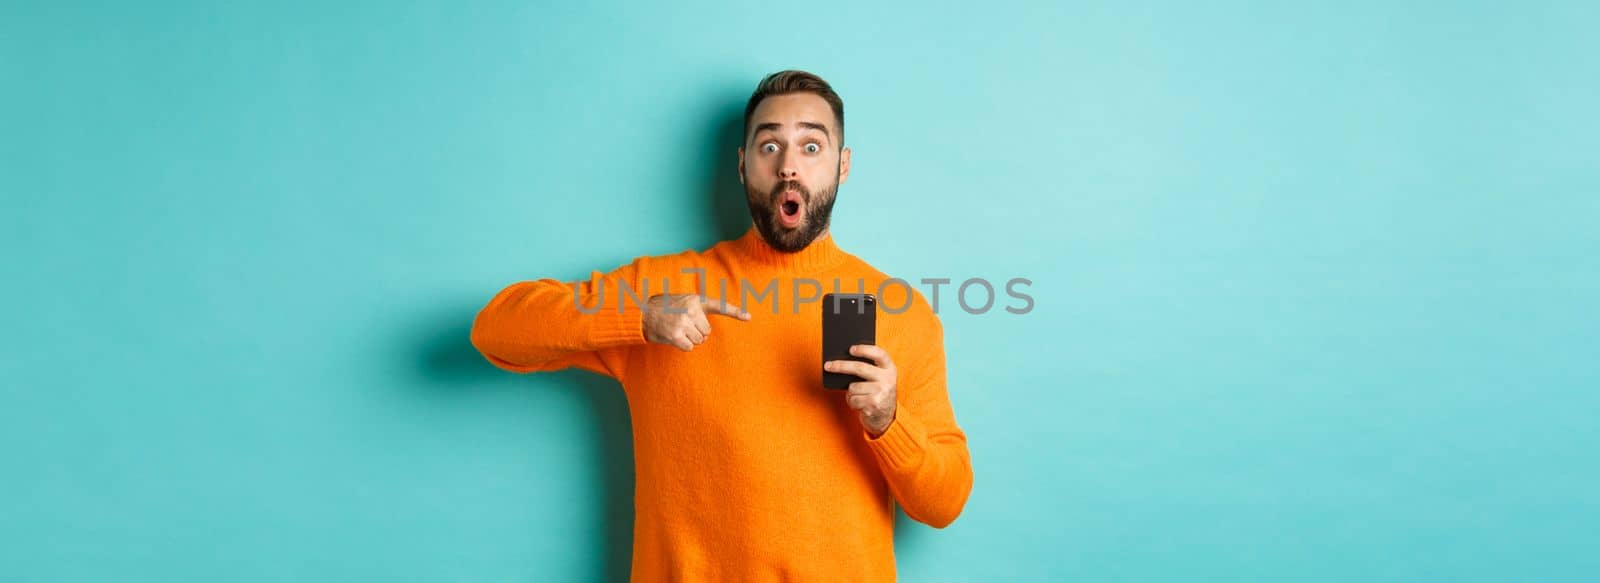 Image of impressed man showing something on mobile phone, pointing at smartphone and gasping amazed, standing in orange sweater over light blue background.